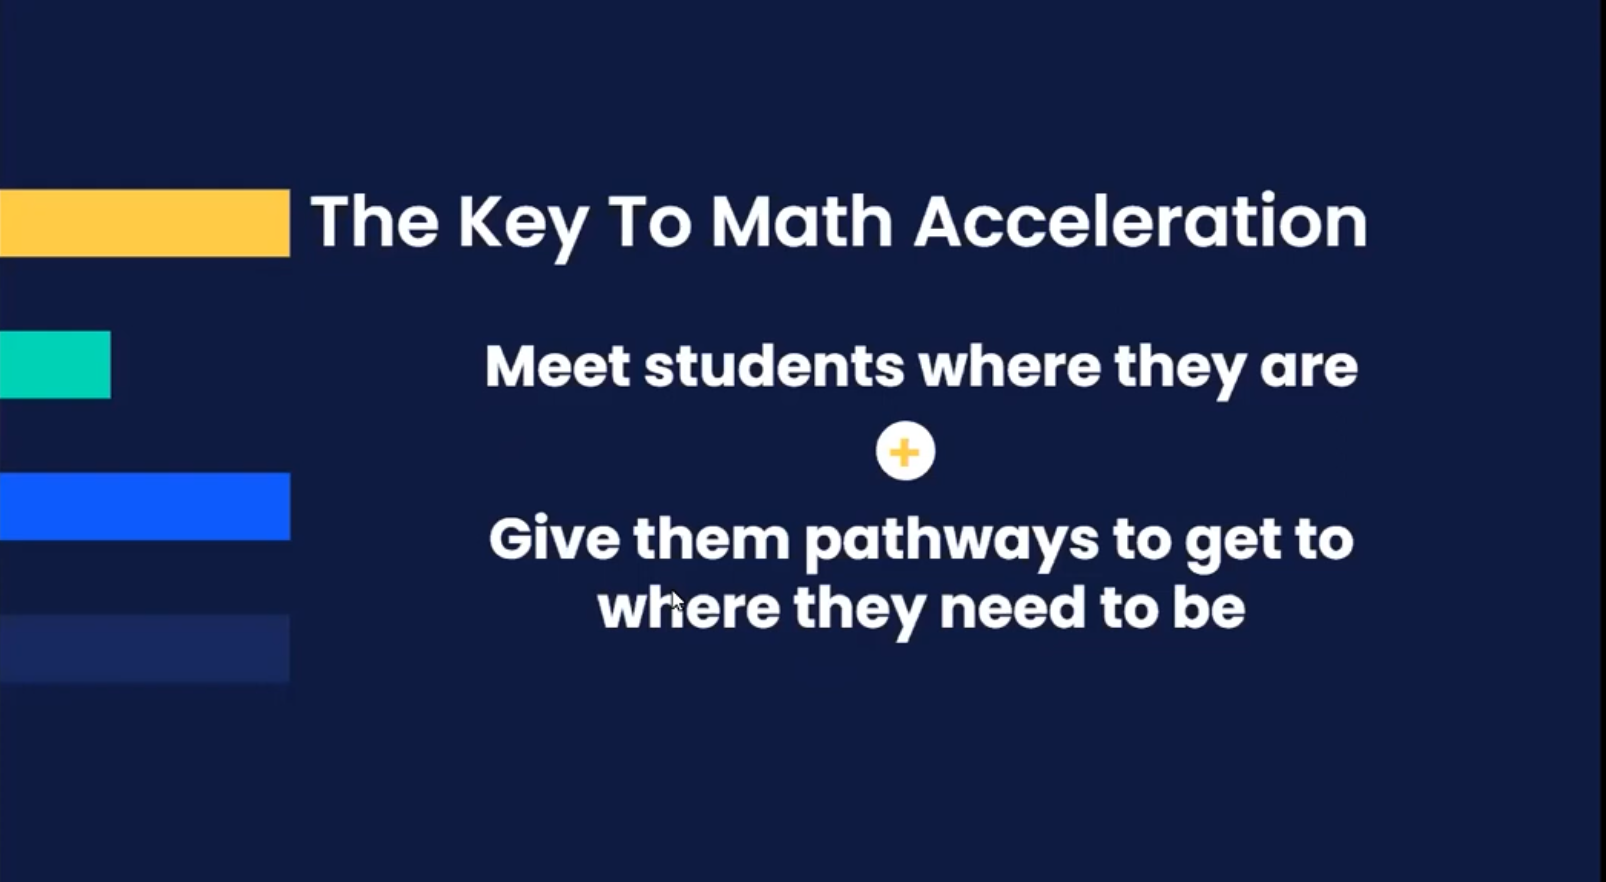 The Key to Math Acceleration is giving students pathways to get where they need to be